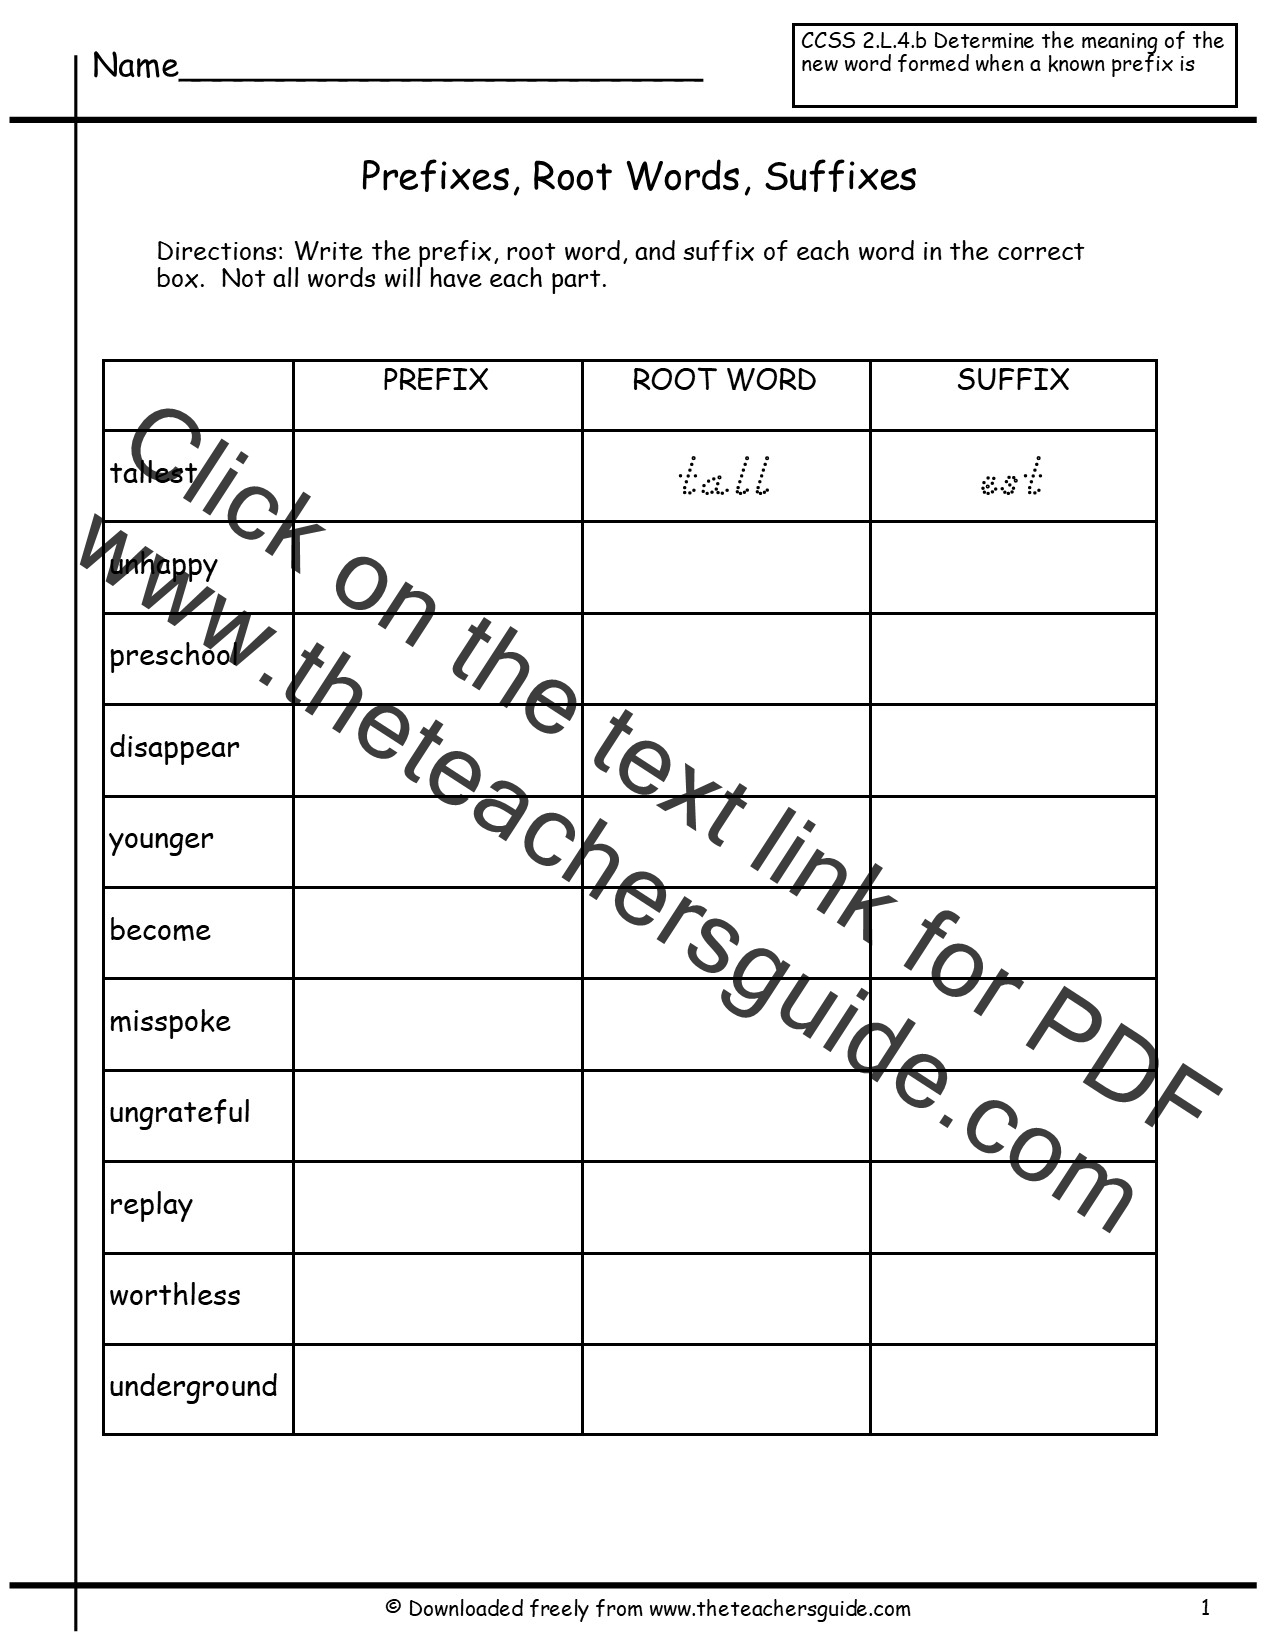 printable-worksheets-prefixes-and-suffixes-for-grade-2-cypresspimf28